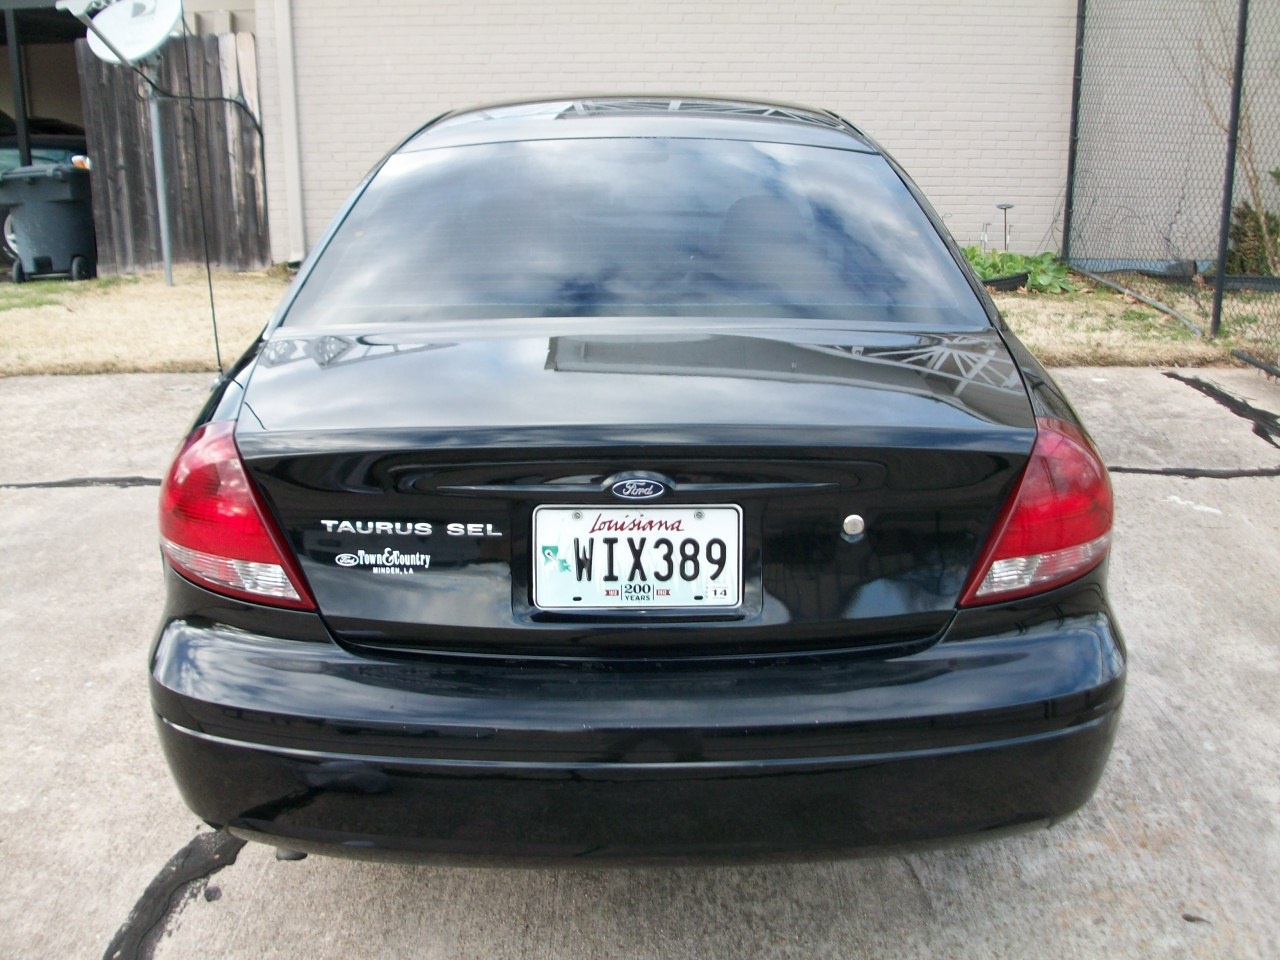 2007 Ford taurus sel specifications #6